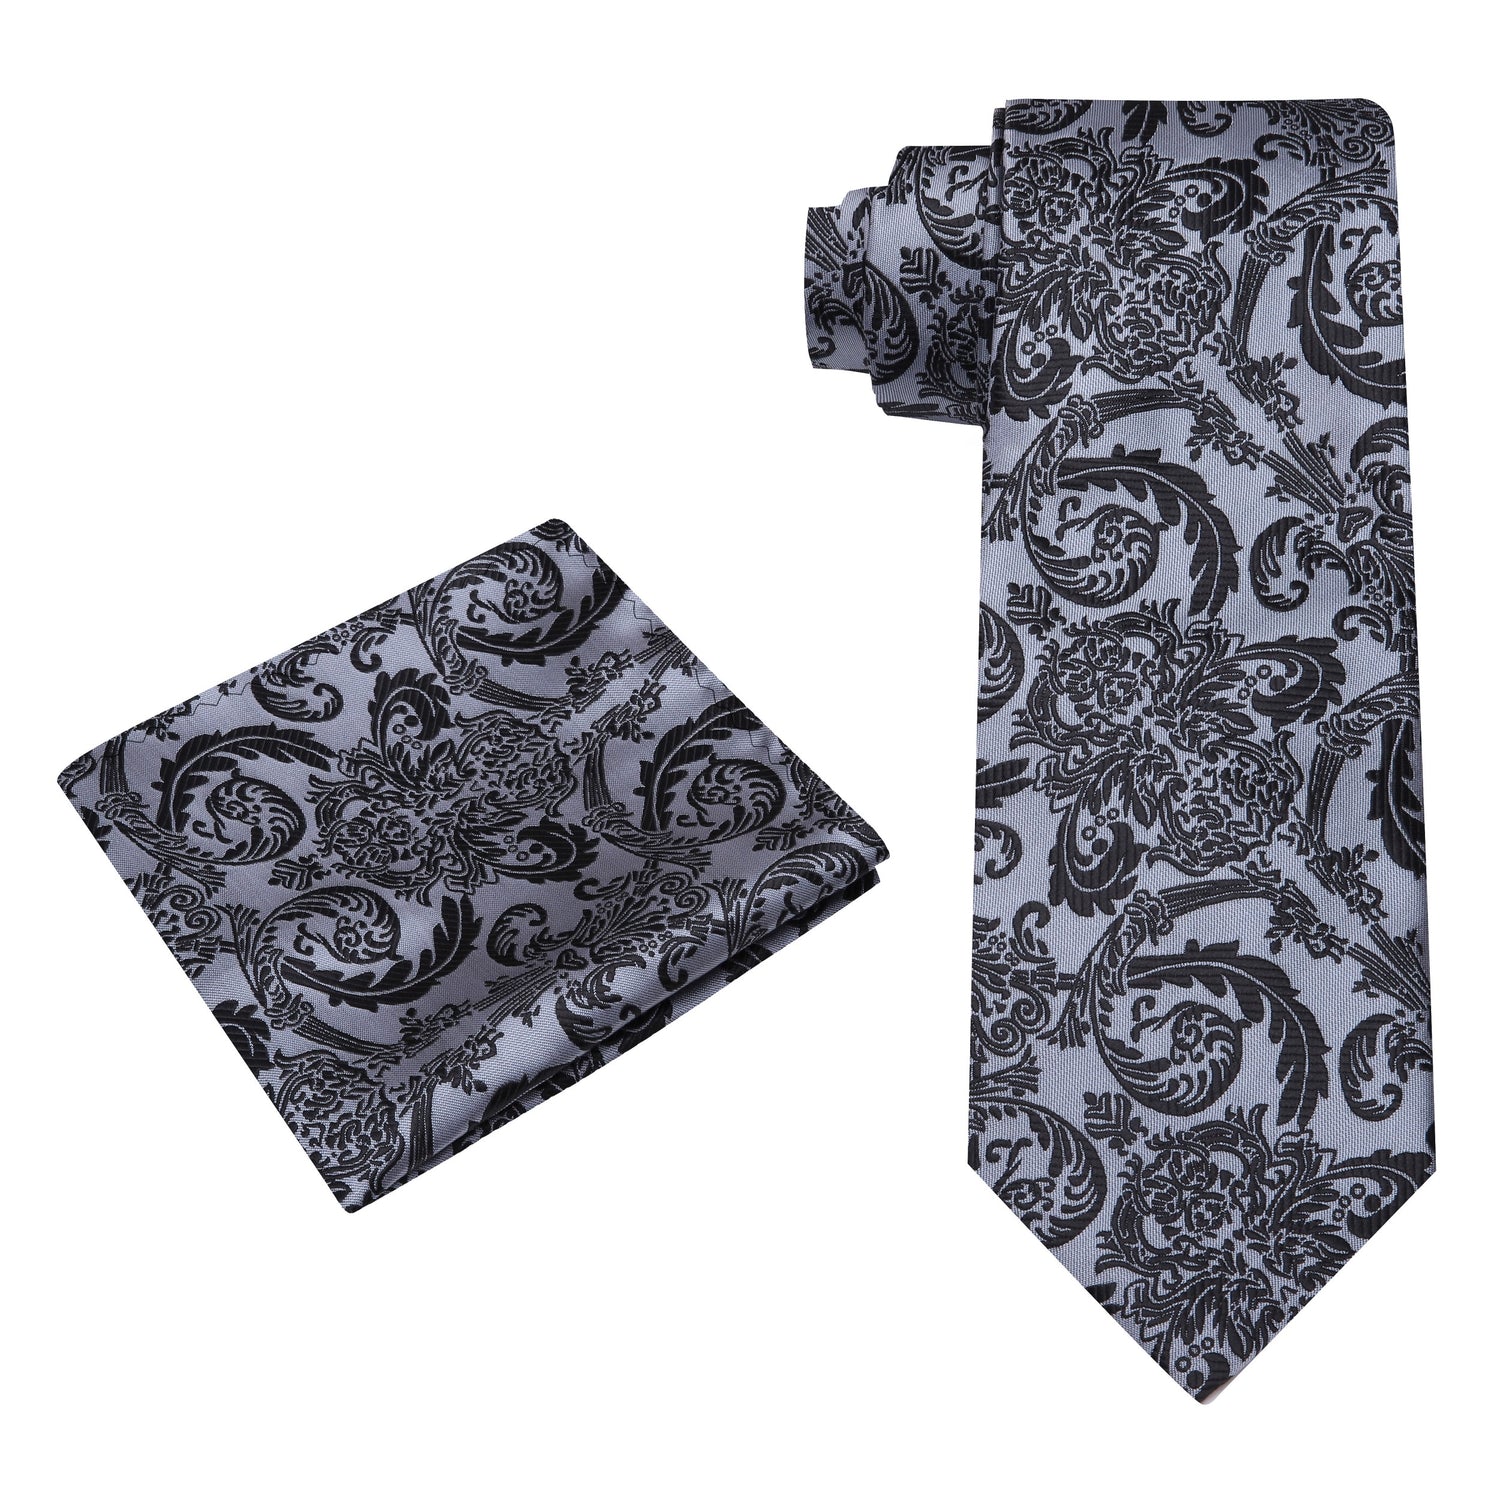 Alt View: Grey and Black Intricate Pattern Silk Necktie and Pocket Square